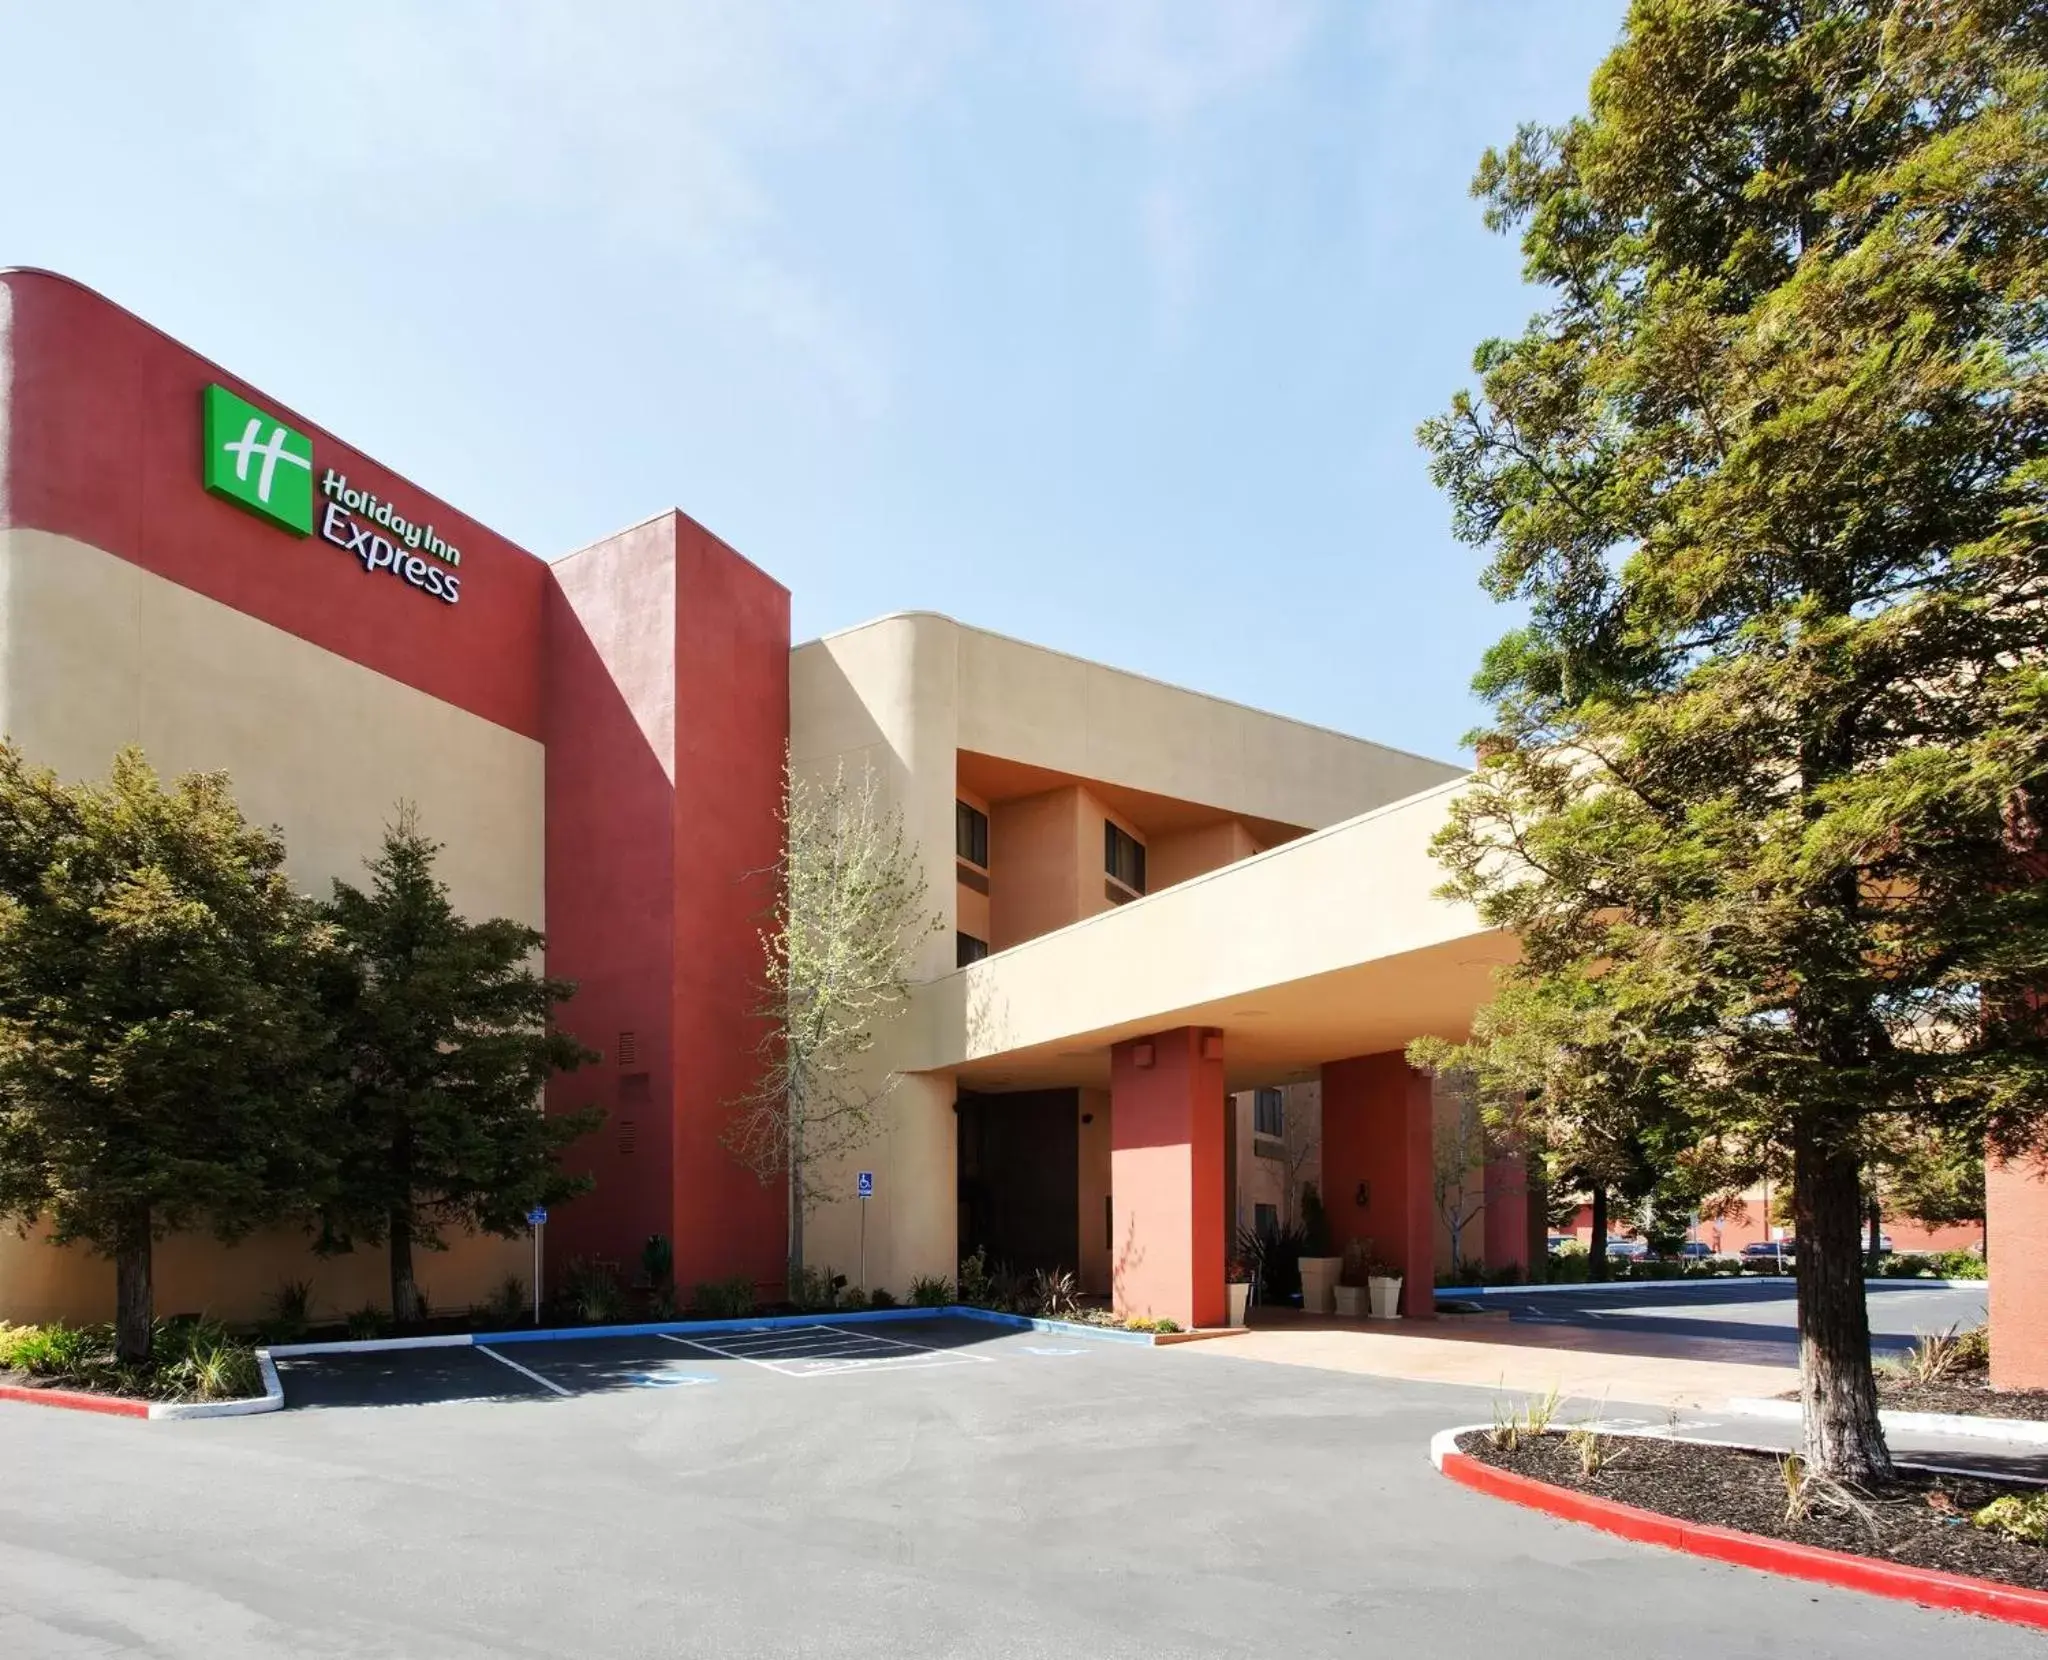 Property Building in Holiday Inn Express Hotel Union City San Jose, an IHG Hotel